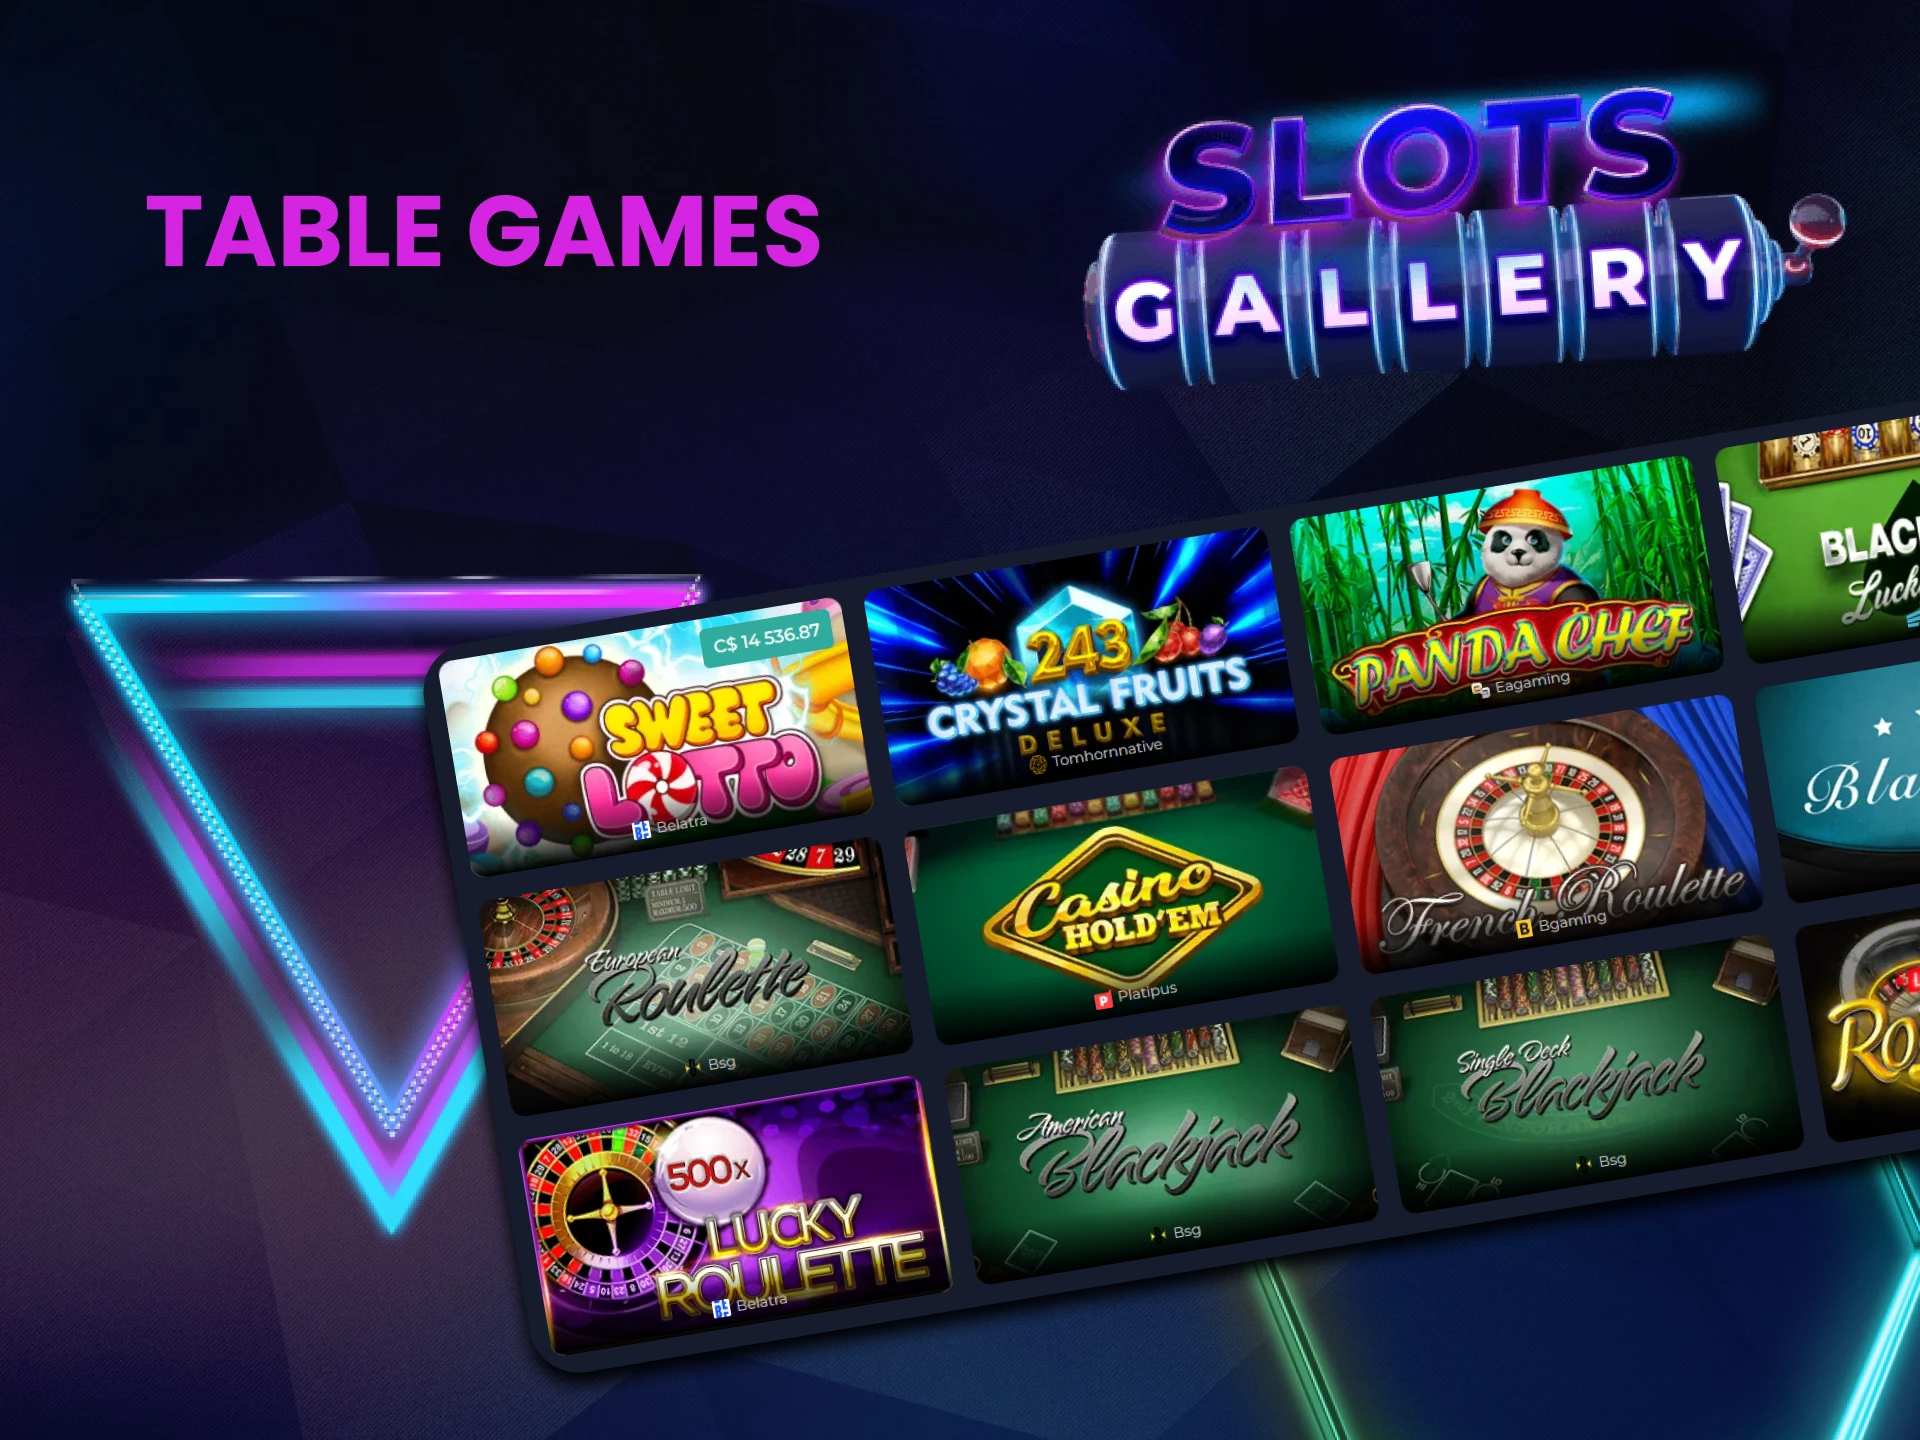 For casino games from Slots Gallery, choose the Table Games section.